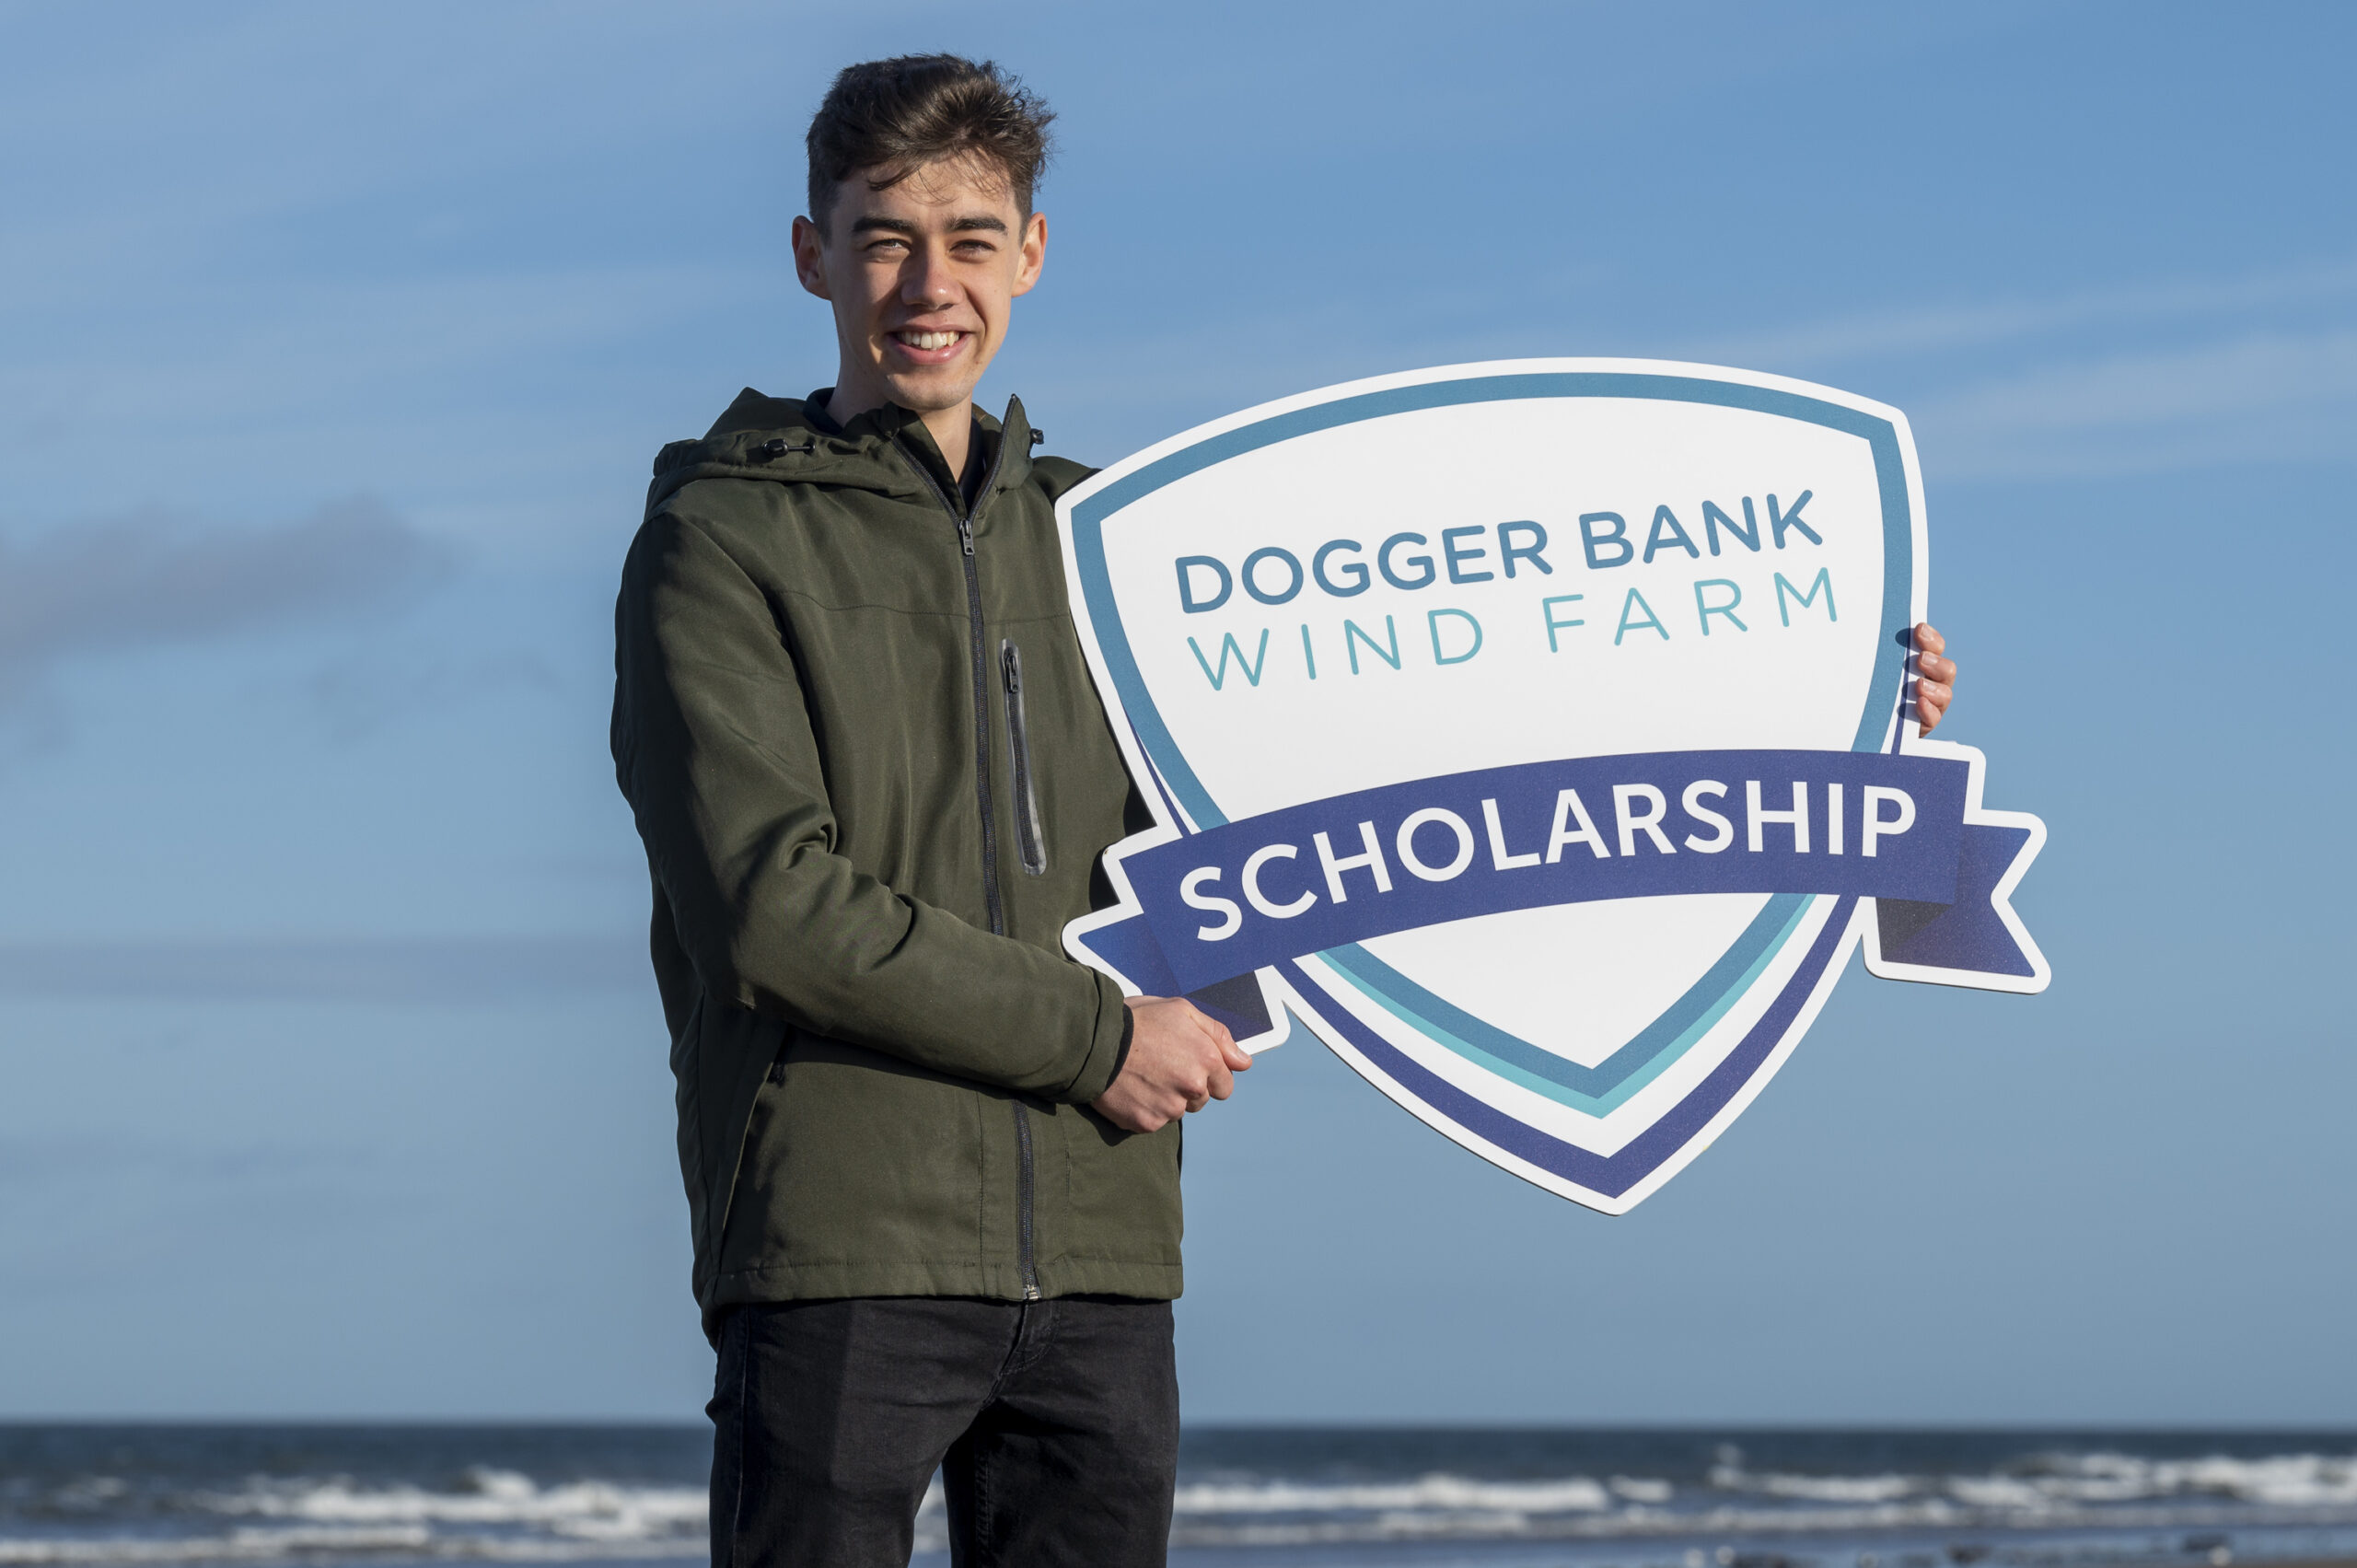 Dogger Bank Wind Farm Opens Second Round of Scholarship Fund